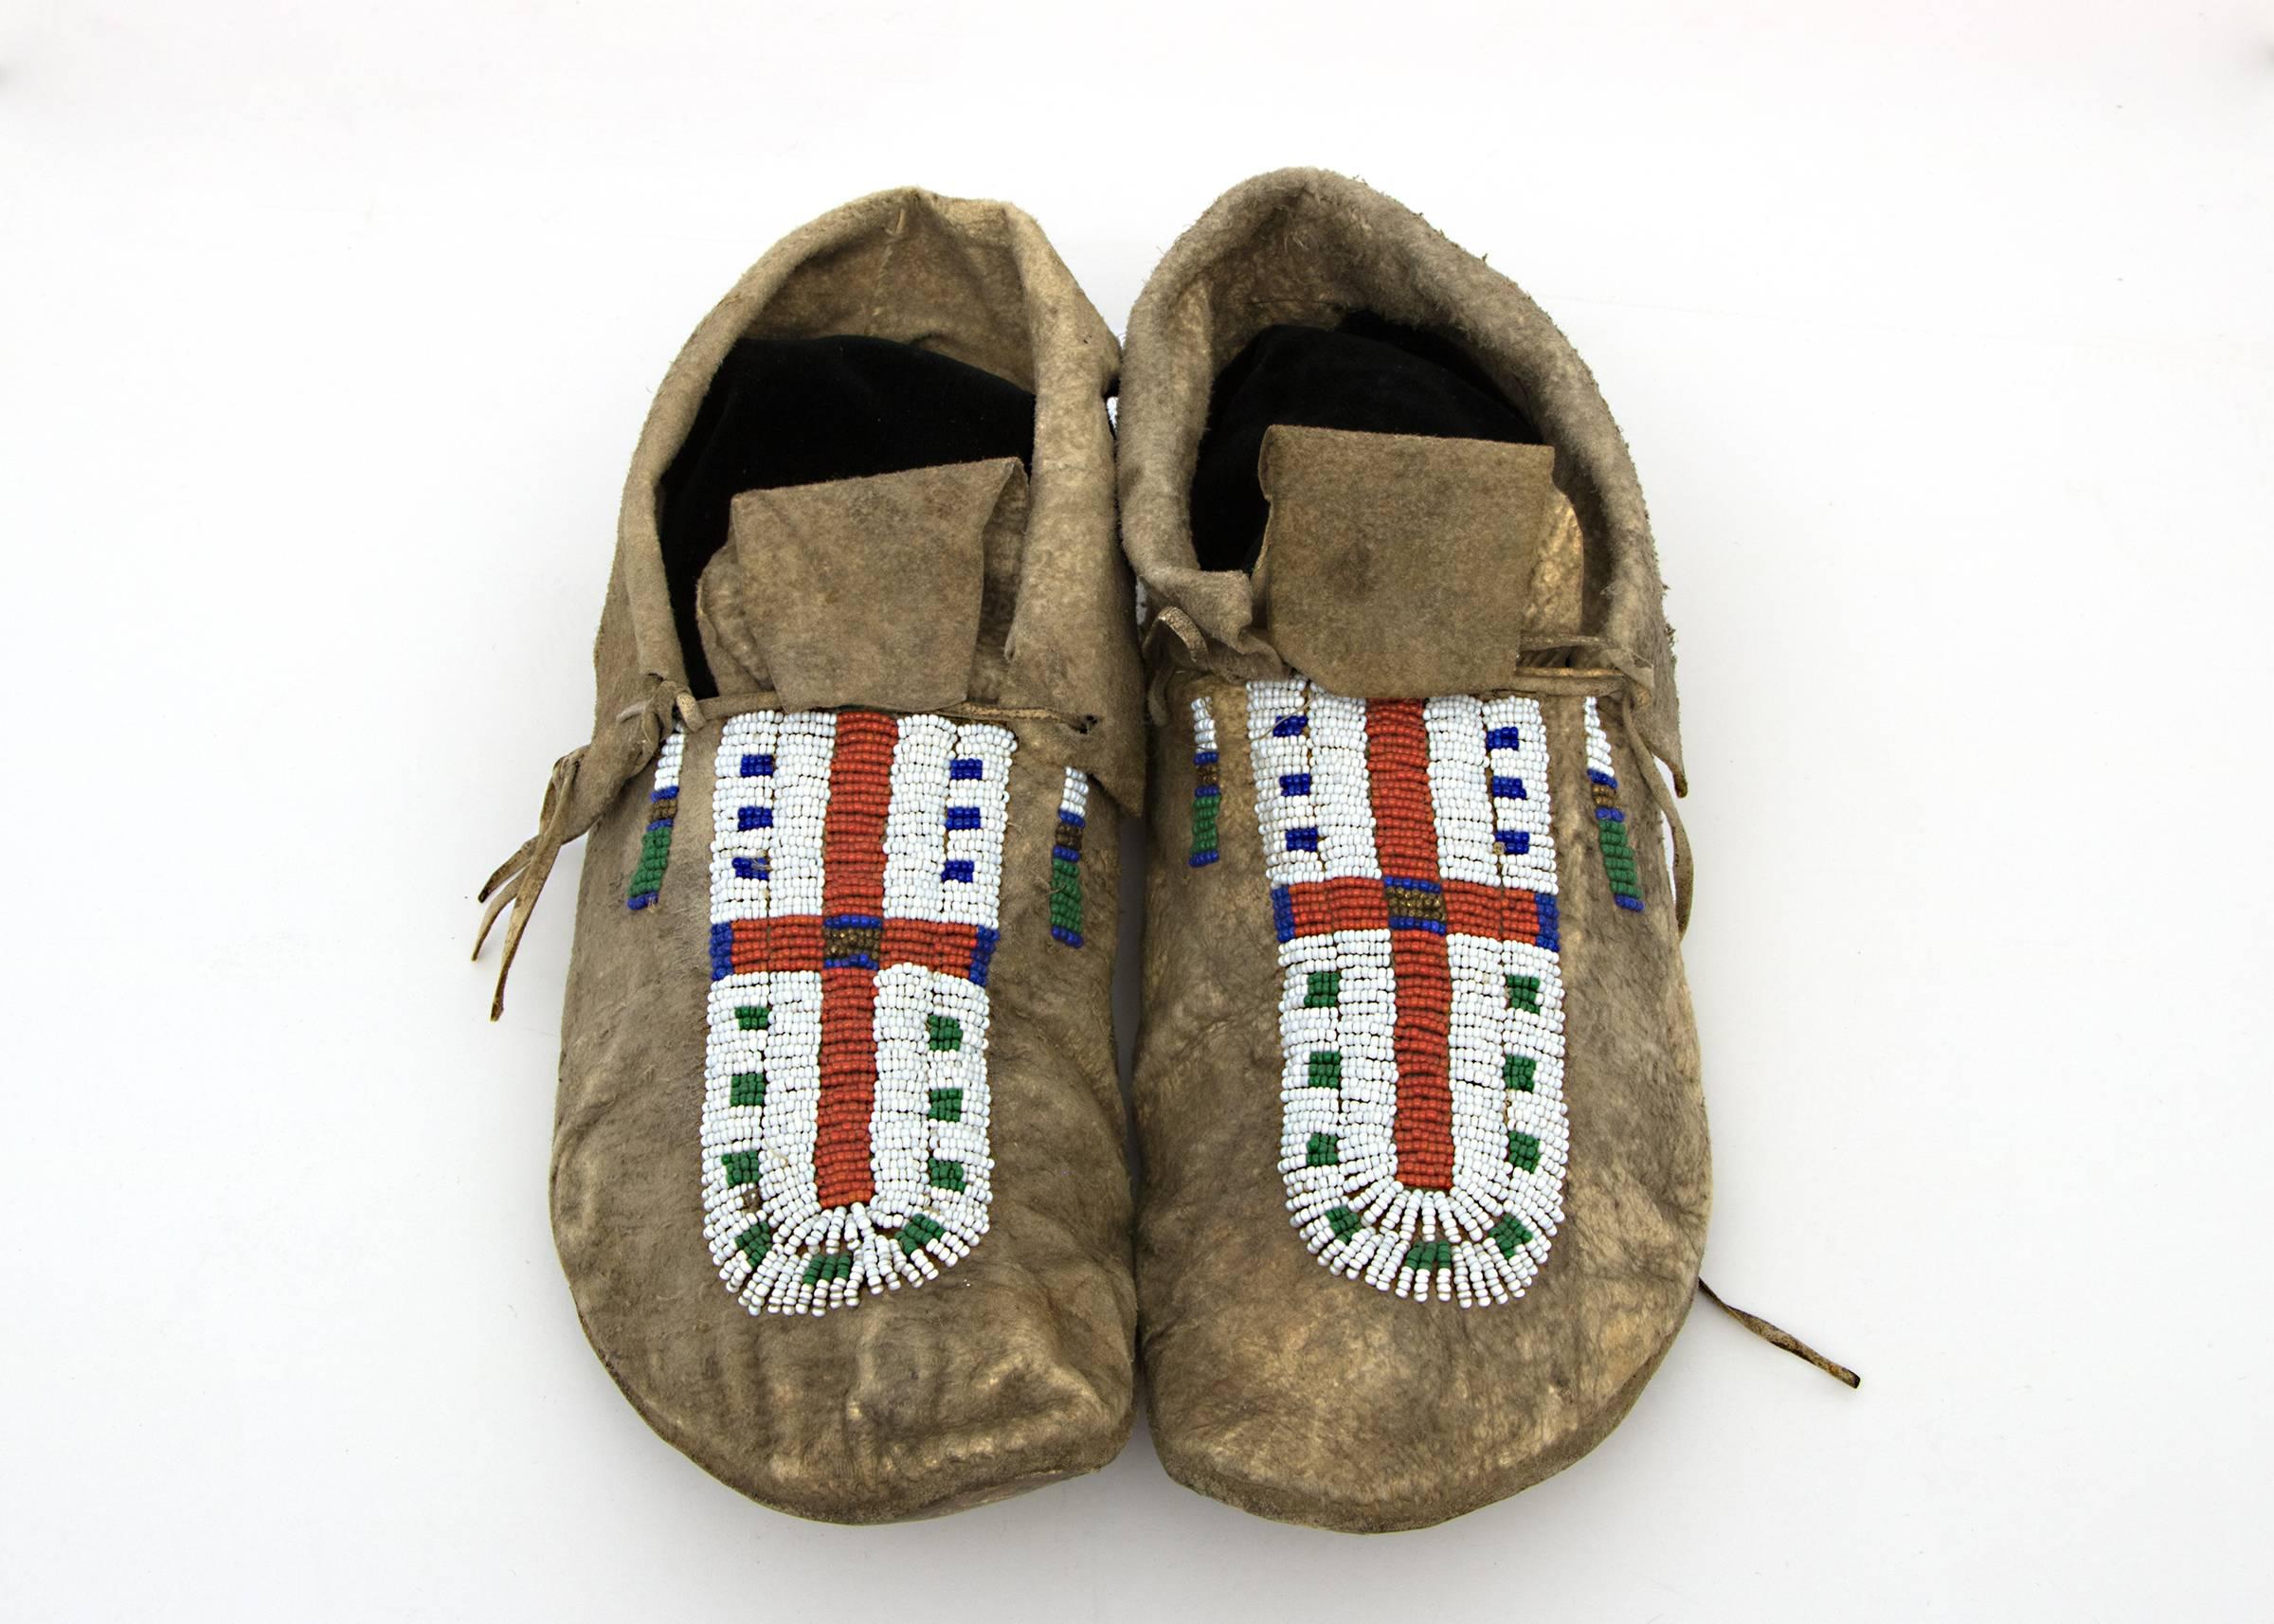 Constructed of native tanned hide with trade beads. Each moc is partially beaded on the vamp with a Red Cross. The cuffs are fringed. 

The Arapaho, members of the Plains Indian culture group, were nomadic with territory extending across parts of